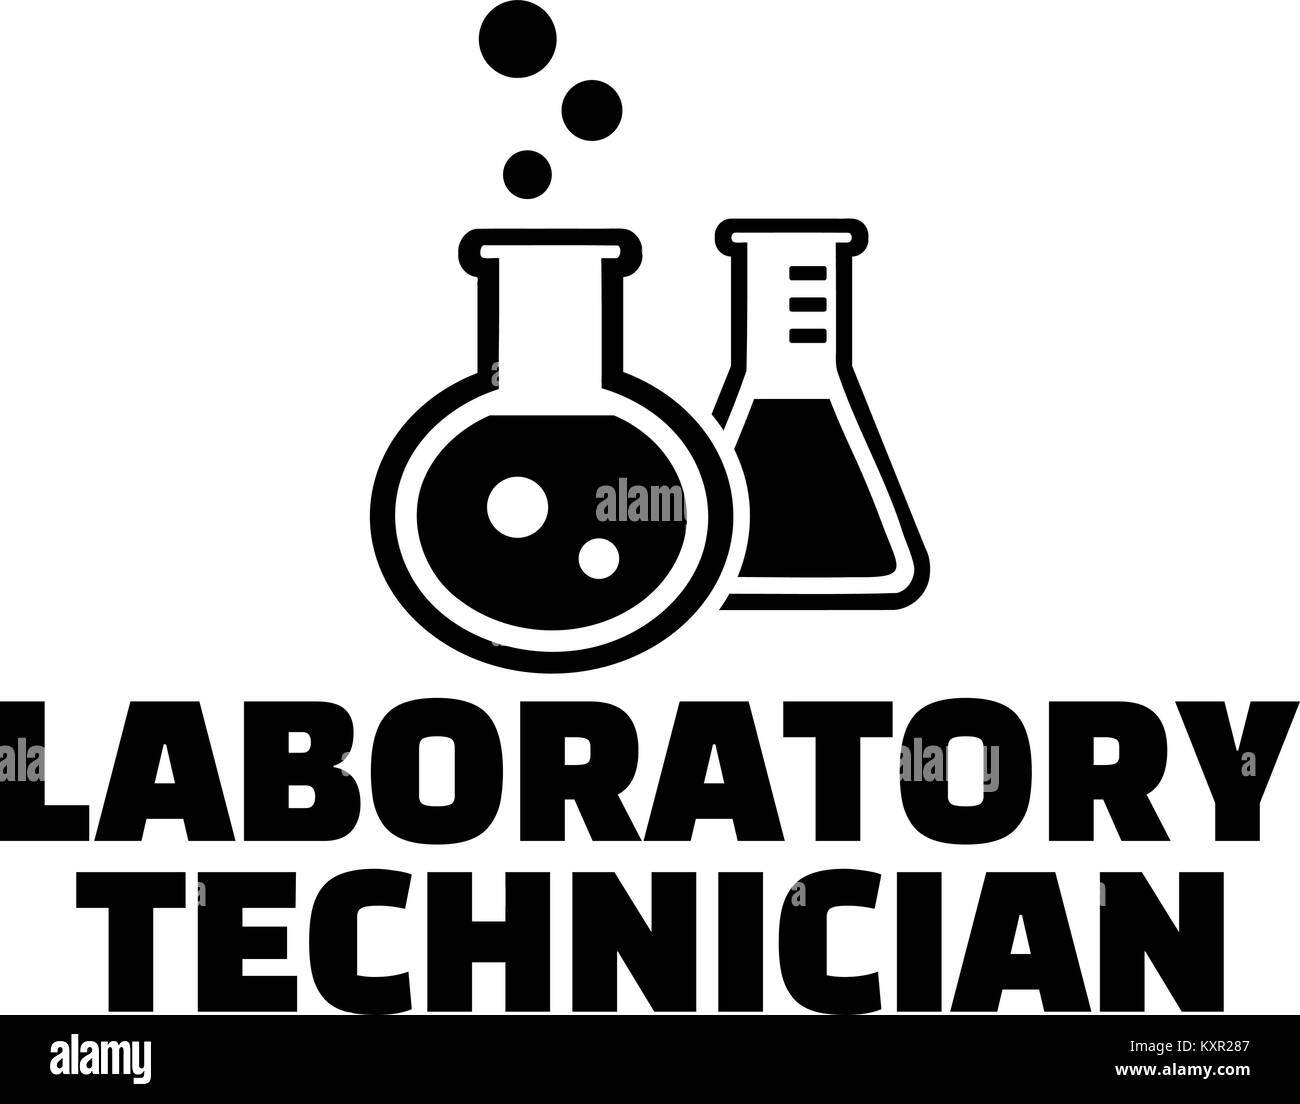 Biology lab technician Stock Vector Images - Alamy